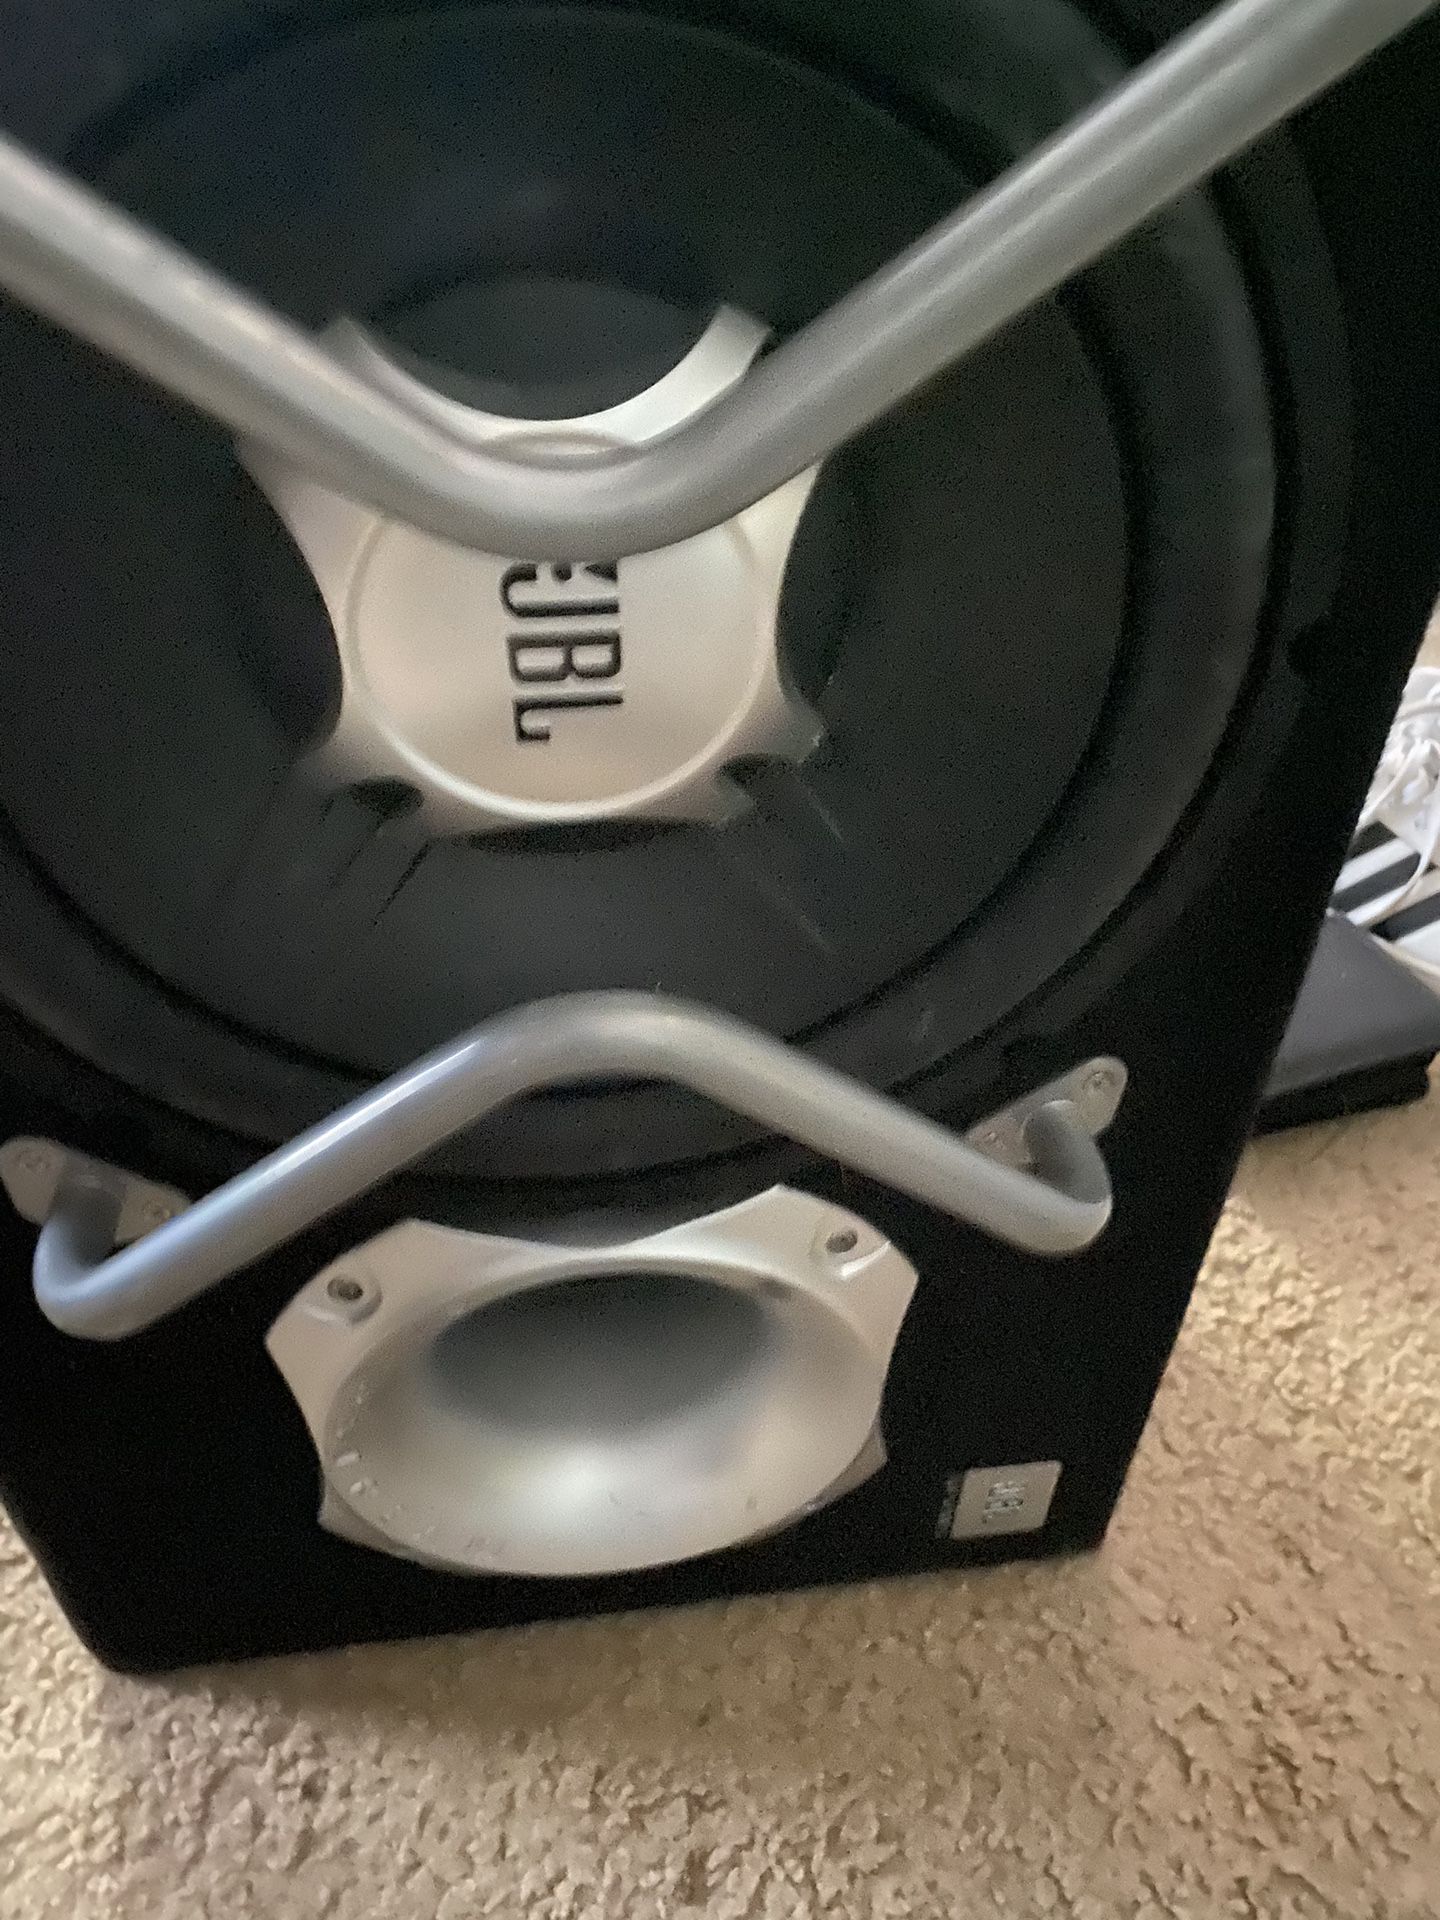 JBL 12 Inch Subwoofer With Built In Amp 